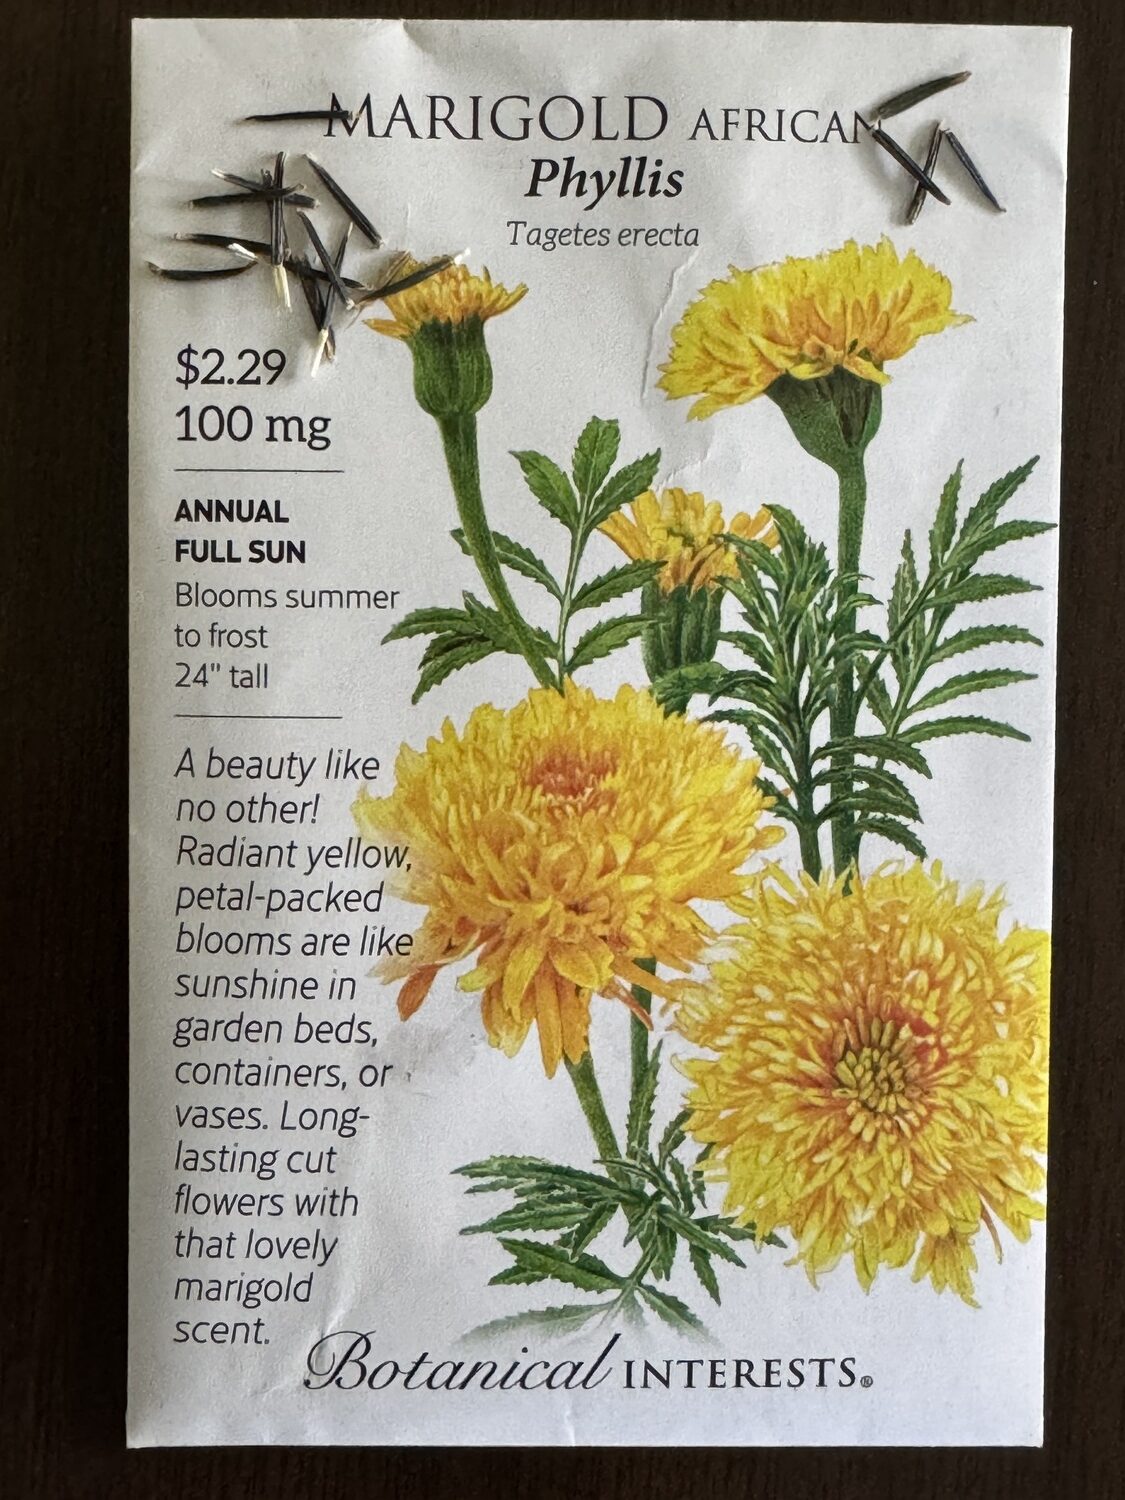 Marigold seeds (top left and right corners) are about a half inch long and easy to handle. When sown at home in cell packs late in the spring, they make great late-planted plants that will bloom later in the summer until frost. You can also direct sow them in the garden, and now’s the time. ANDREW MESSINGER